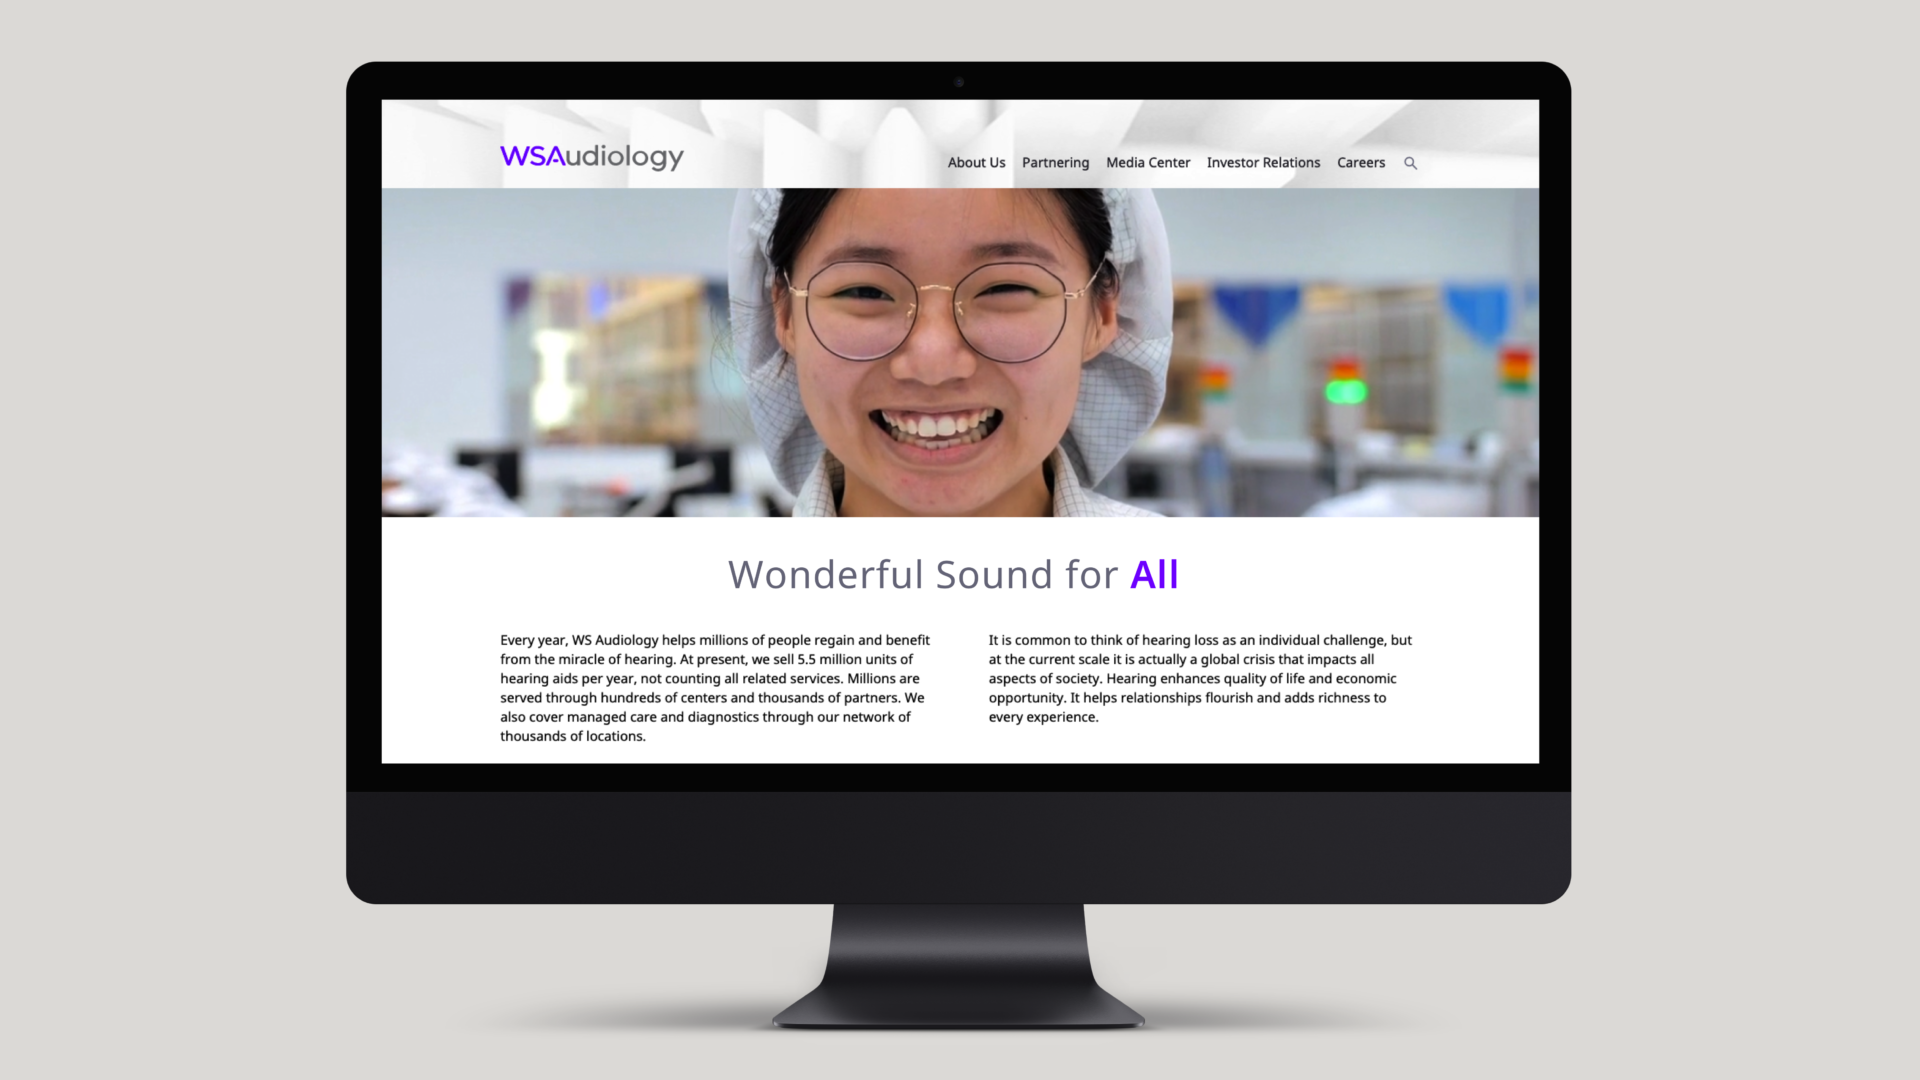 WS Audiology interface mockup on screen by LOOP Associates